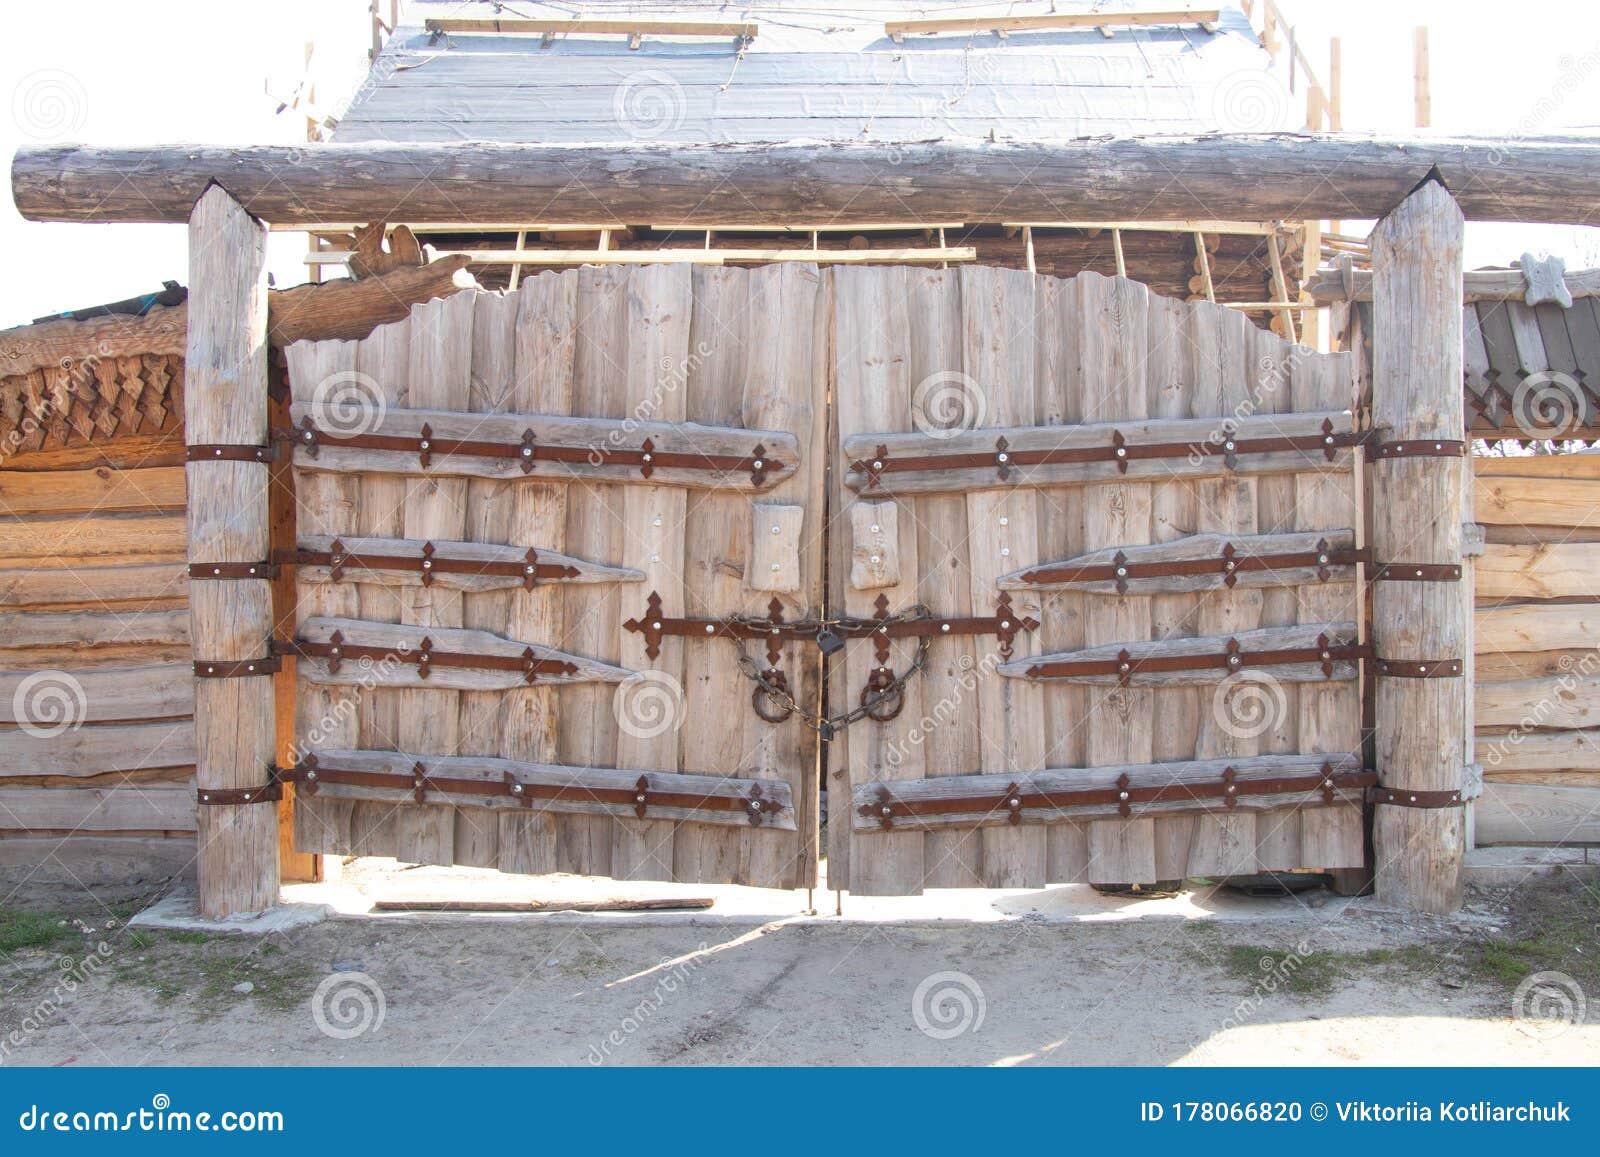 Wooden Gate with an Iron Lock on a Sunny Day Stock Photo - Image of ...